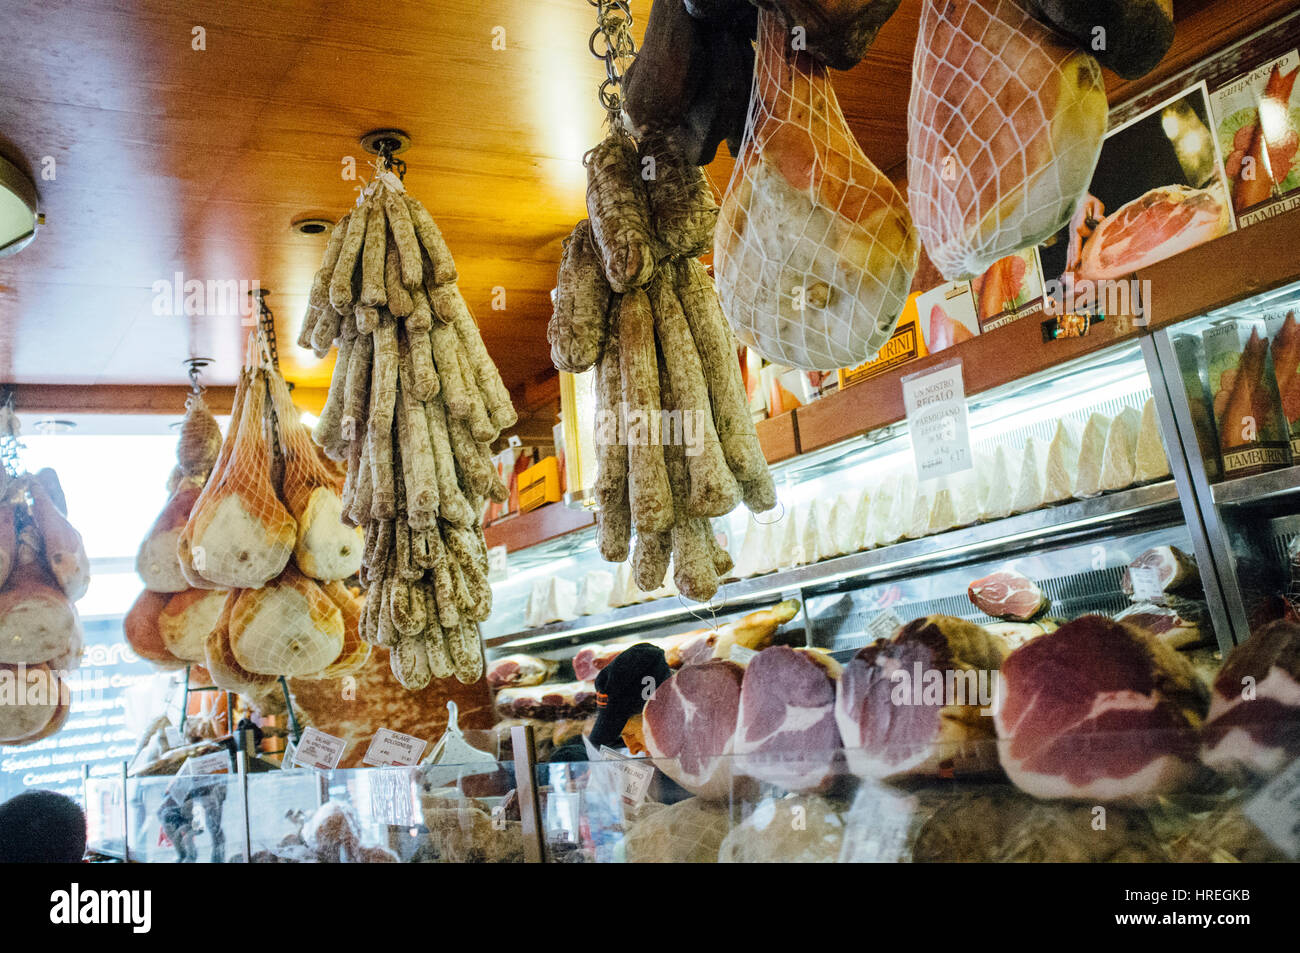 Ditta A.F. Tamburini is a shop in Bologona, which sells a good variety of cold cut and cheese, Italy. Stock Photo